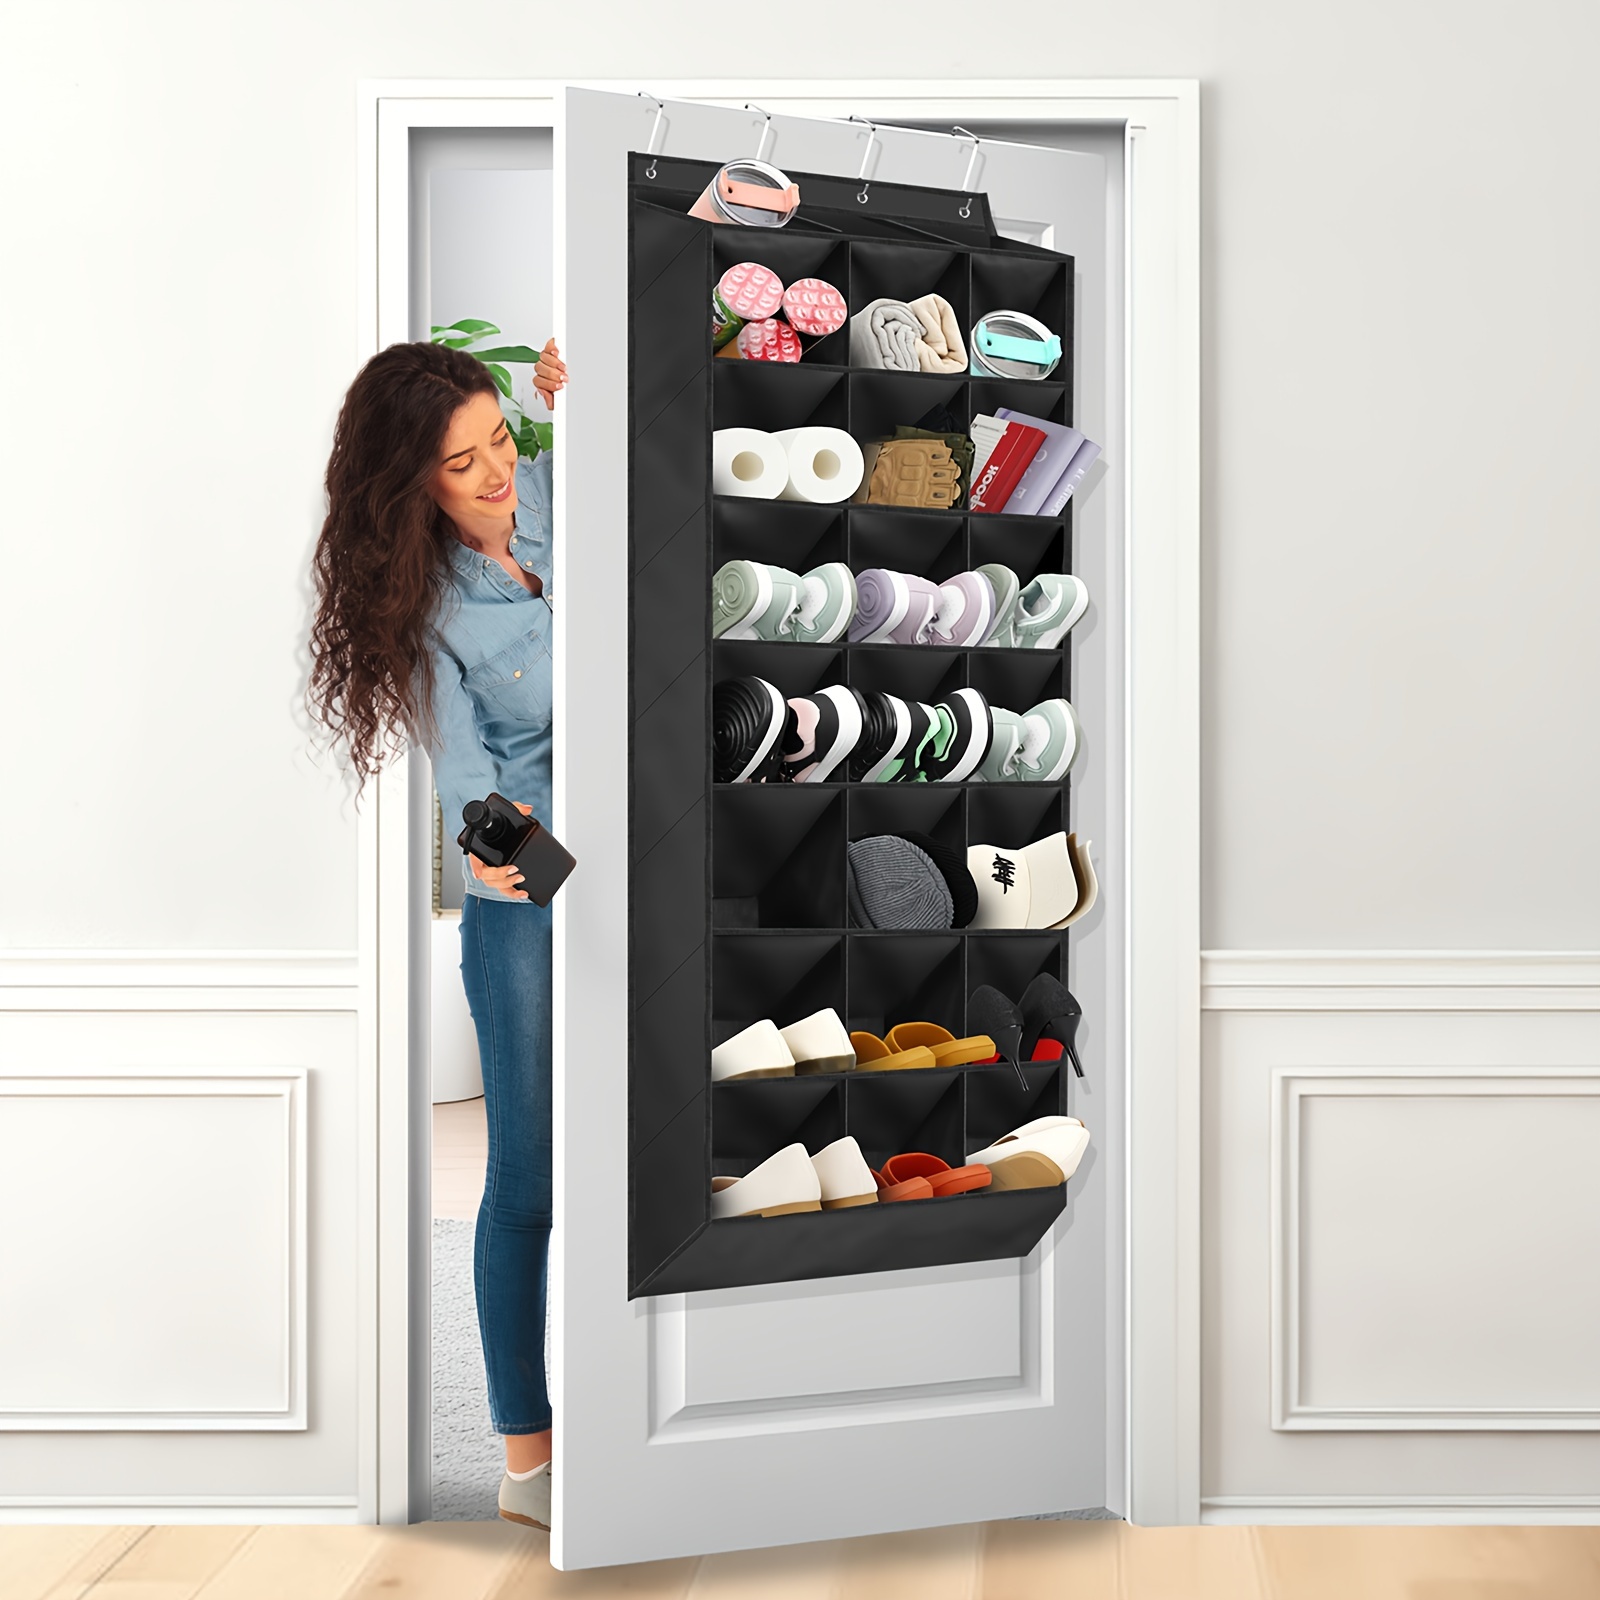 

1pc Over The Door Shoe Storage Rack With 24 Pockets, Hanging Shoe Storage Bag, Household Storage Organizer For Bedroom, Living Room, Home